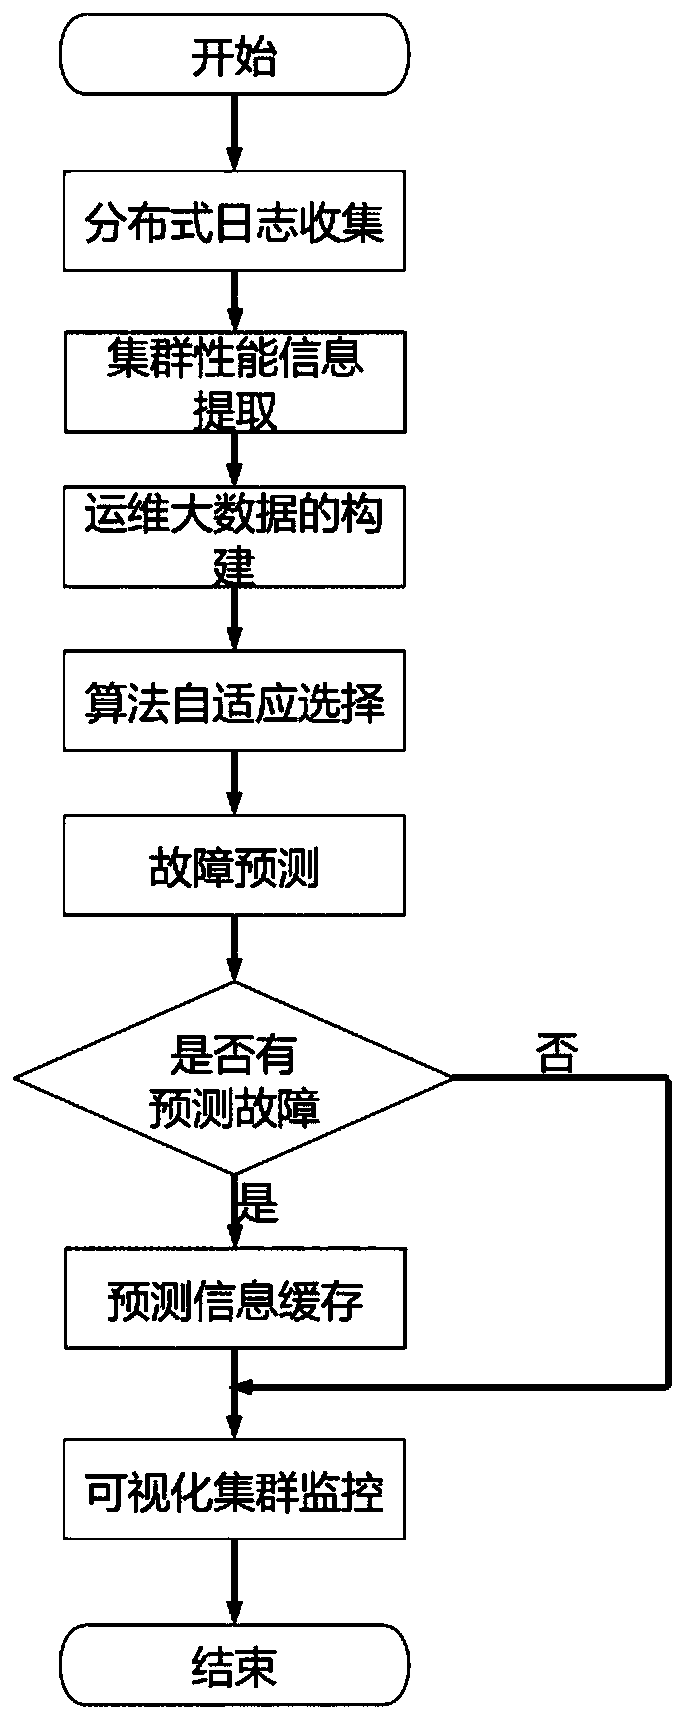 Fault location visualization system and method based on operation and maintenance data prediction